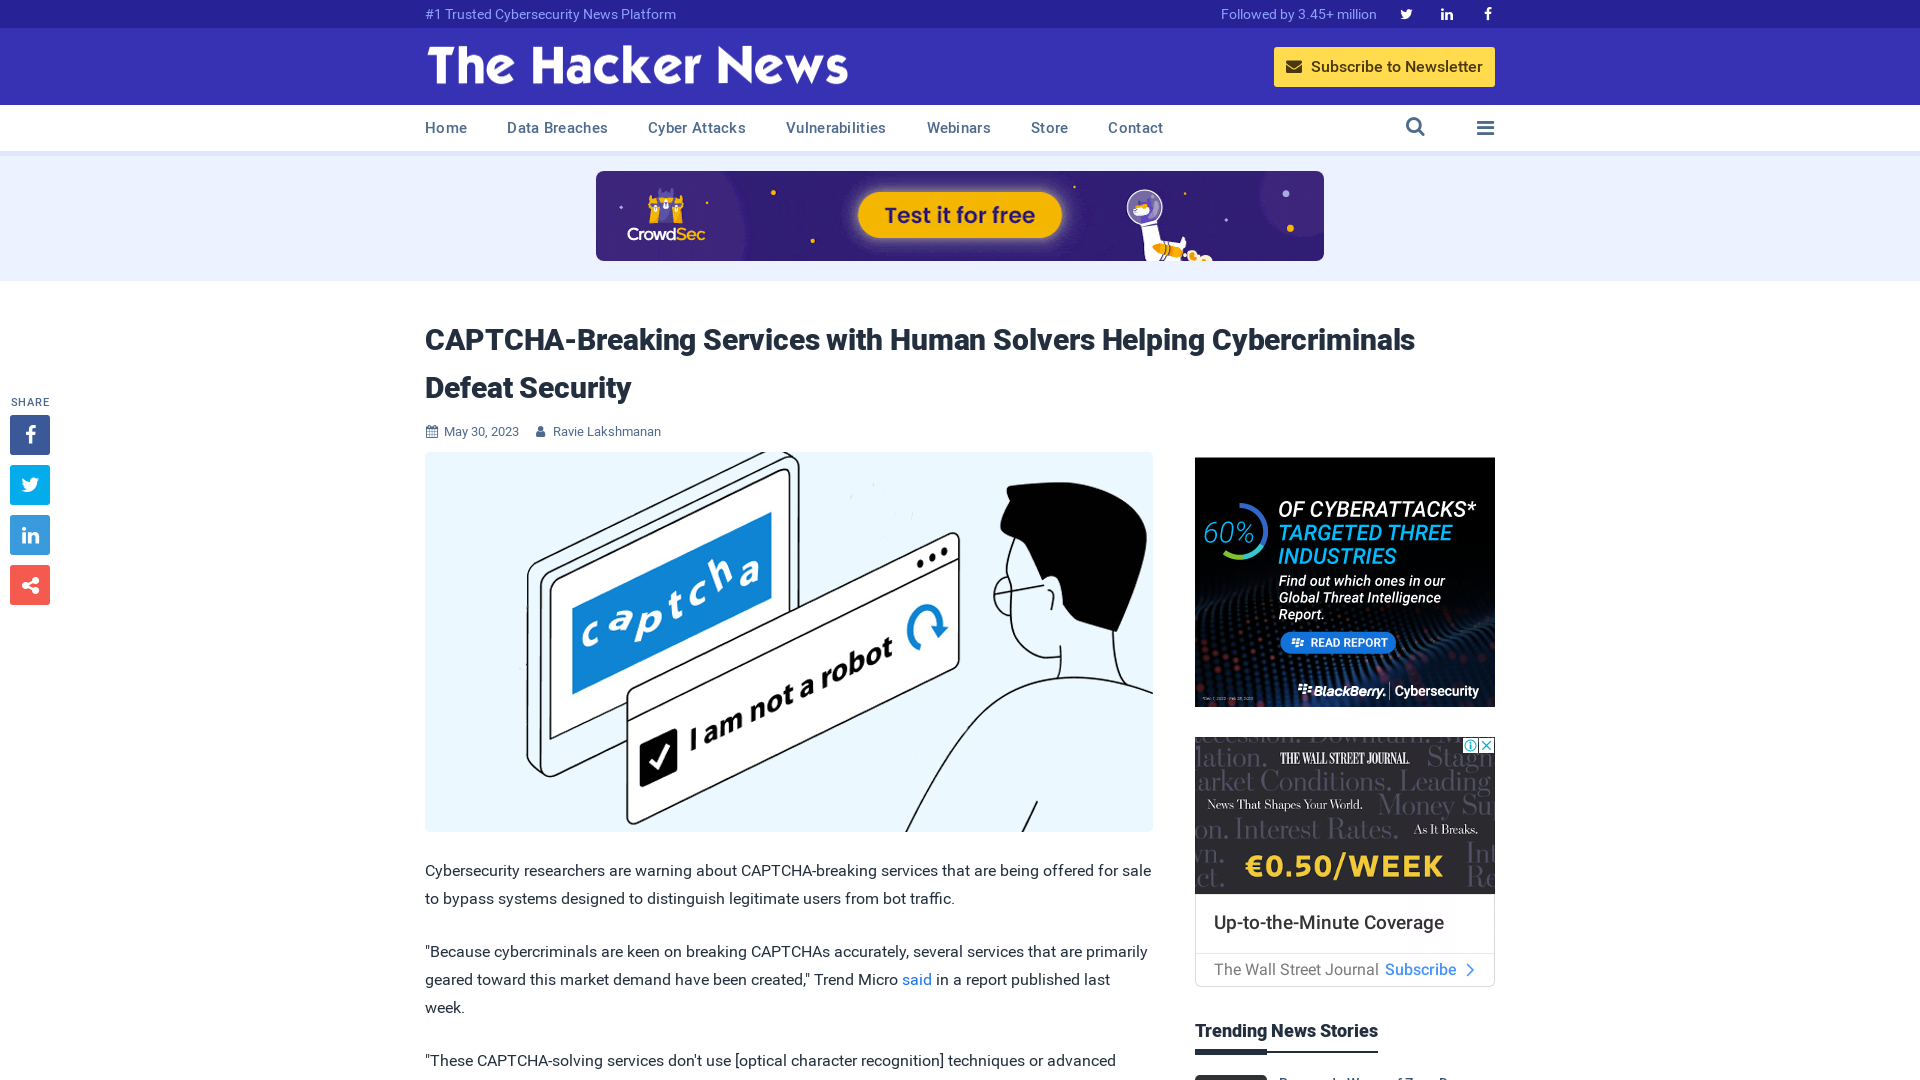 CAPTCHA-Breaking Services with Human Solvers Helping Cybercriminals Defeat Security